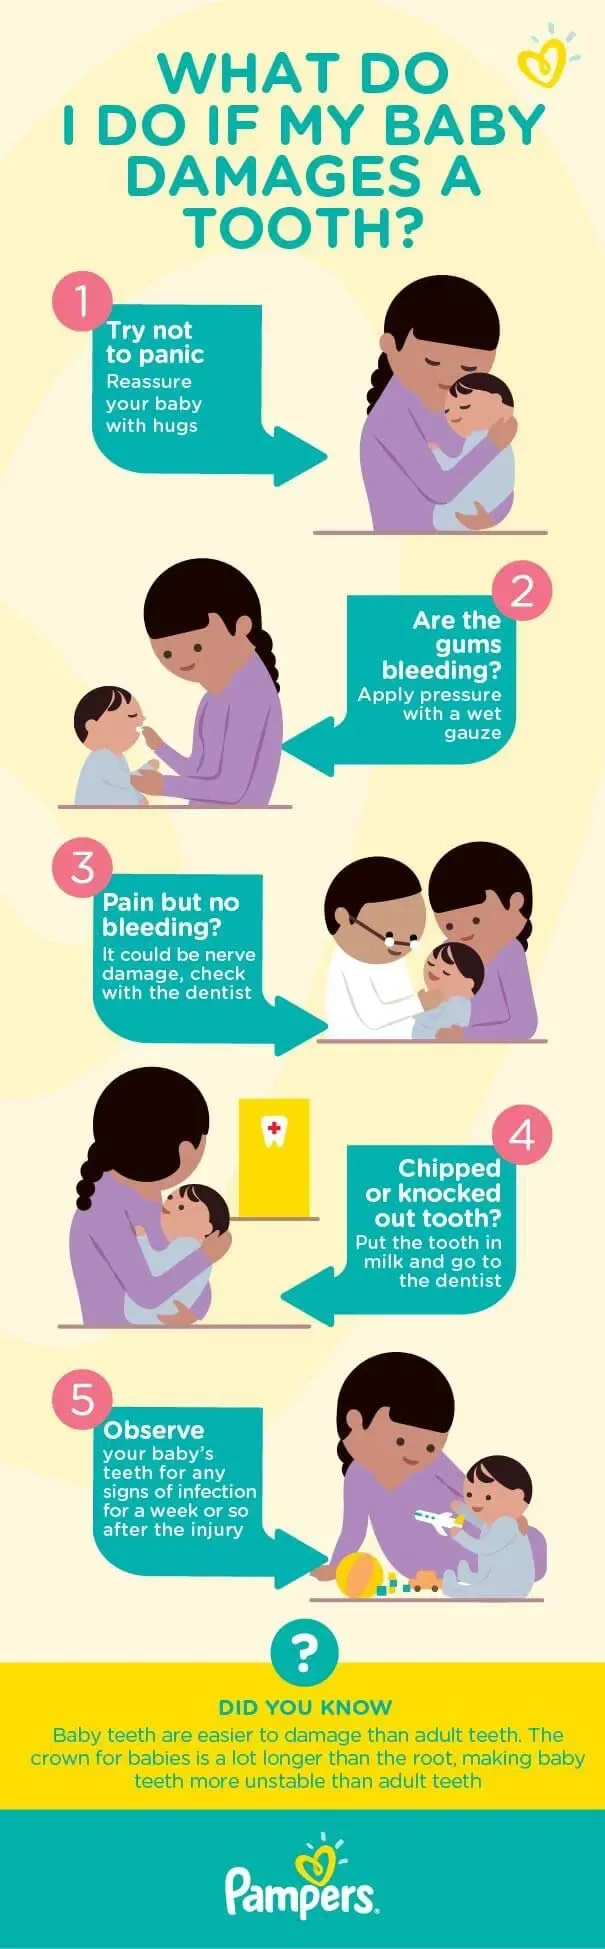 What do I do if my baby damages a tooth